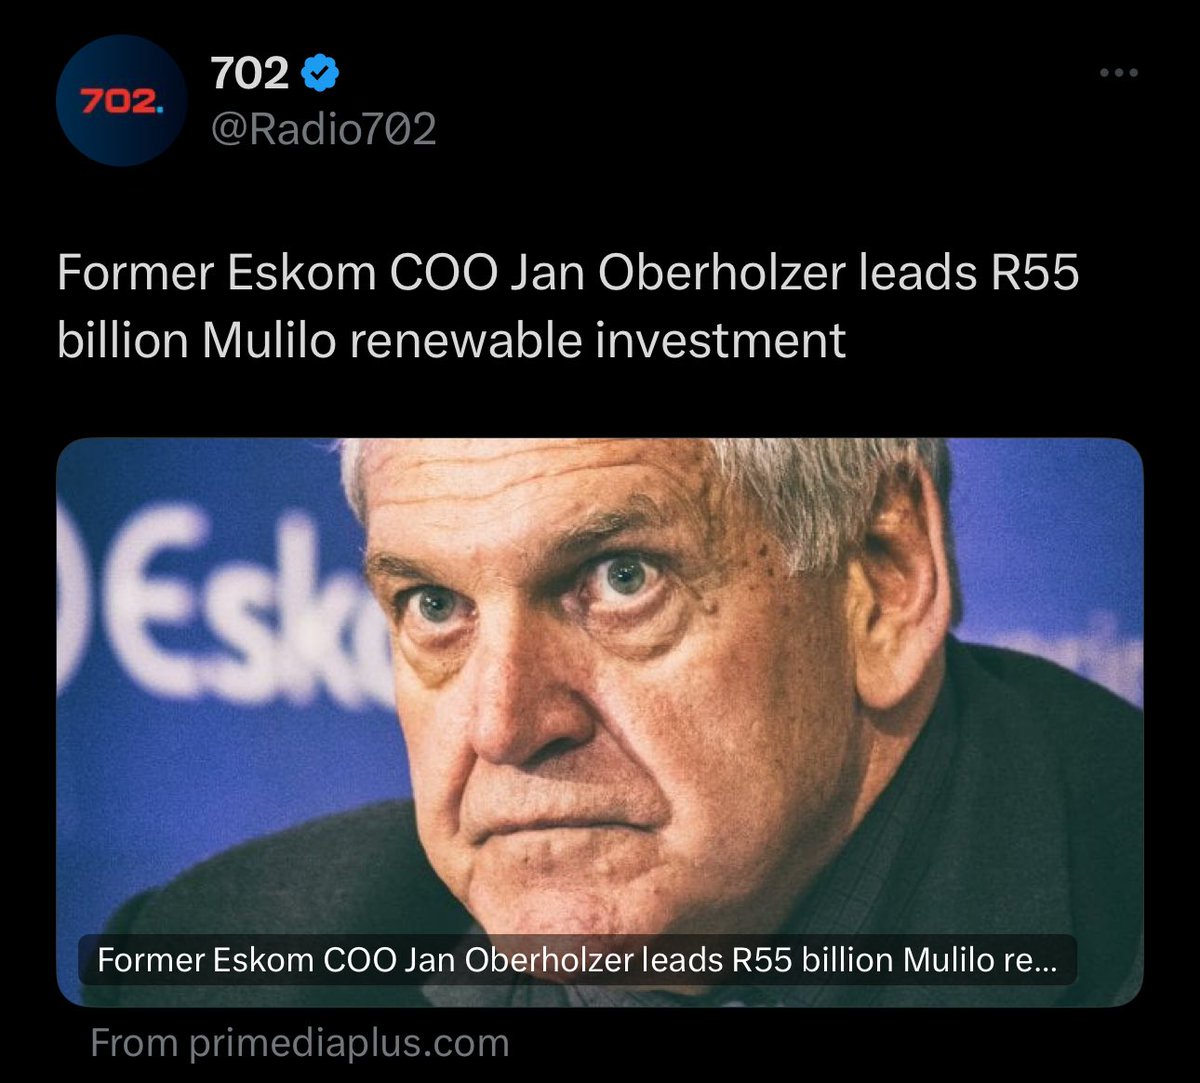 All these Eskom leaders who were meant to fix Eskom are showing up in the IPP business and making millions. It makes me wonder if they were fixing Eskom or breaking it to sell it for parts.